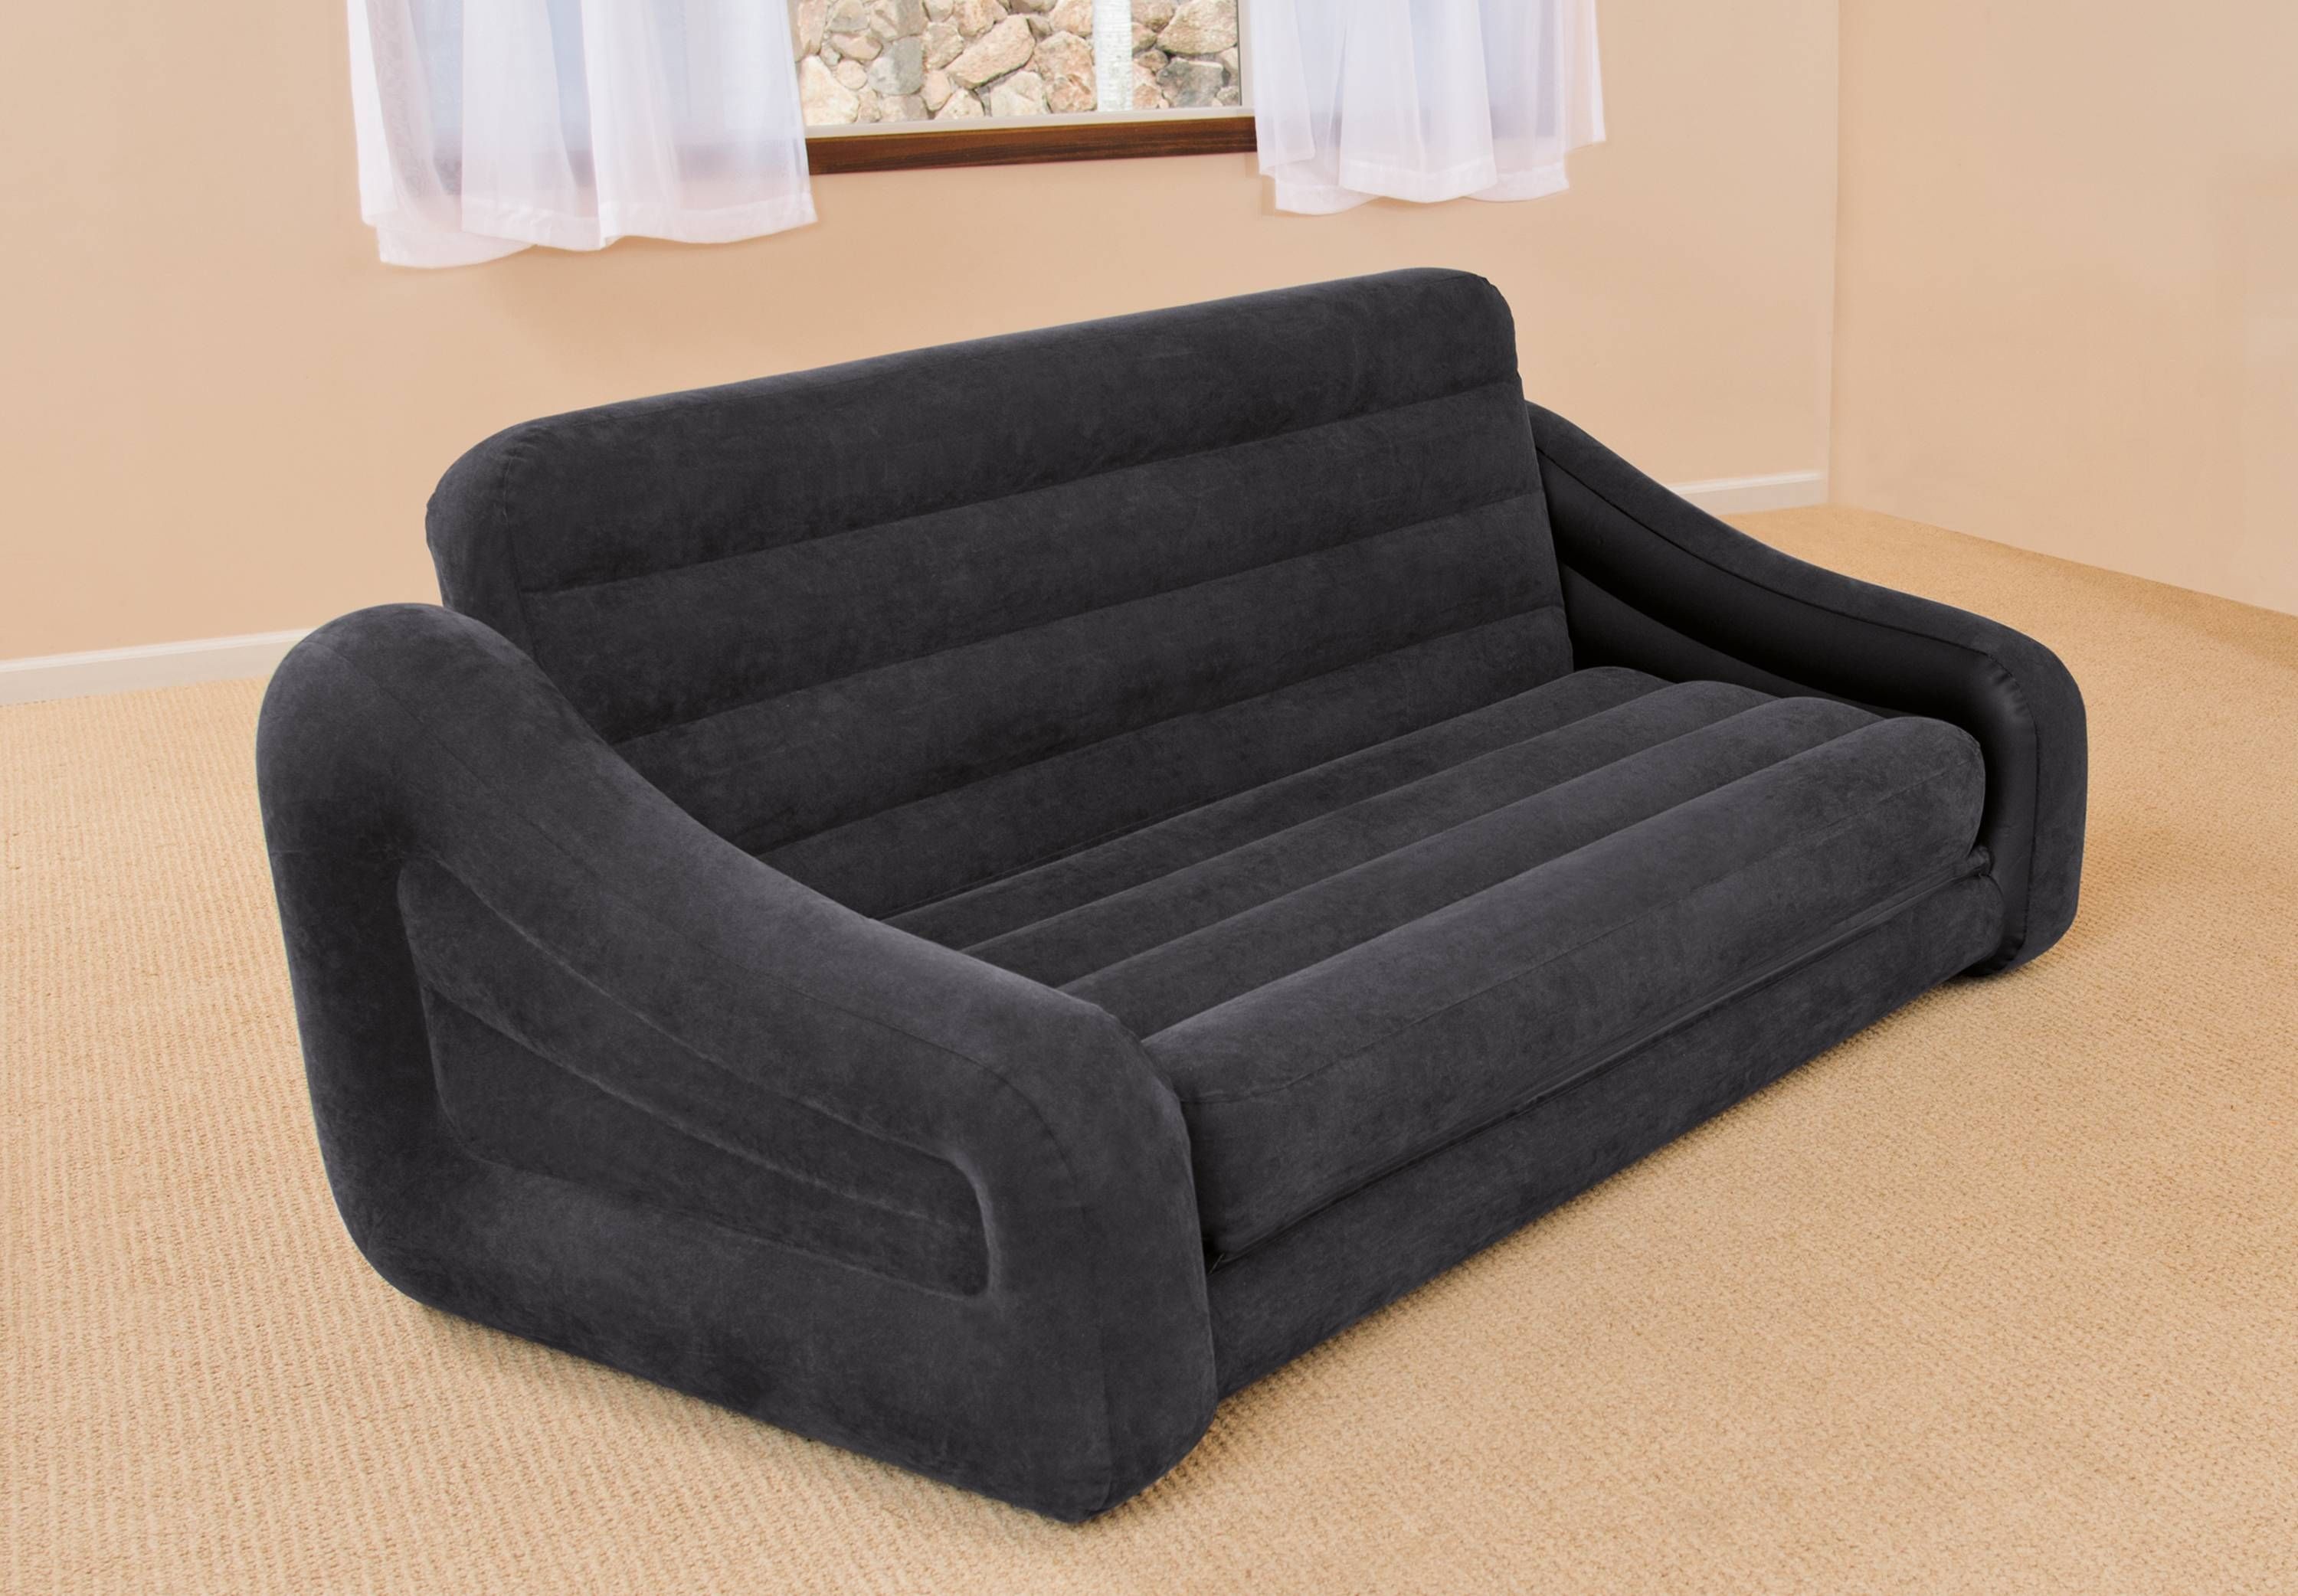 Sofas Center : Bunk With Pull Out Sofa Sofas Beds Thick Mattress Regarding Cheap Sofas Houston (View 29 of 30)